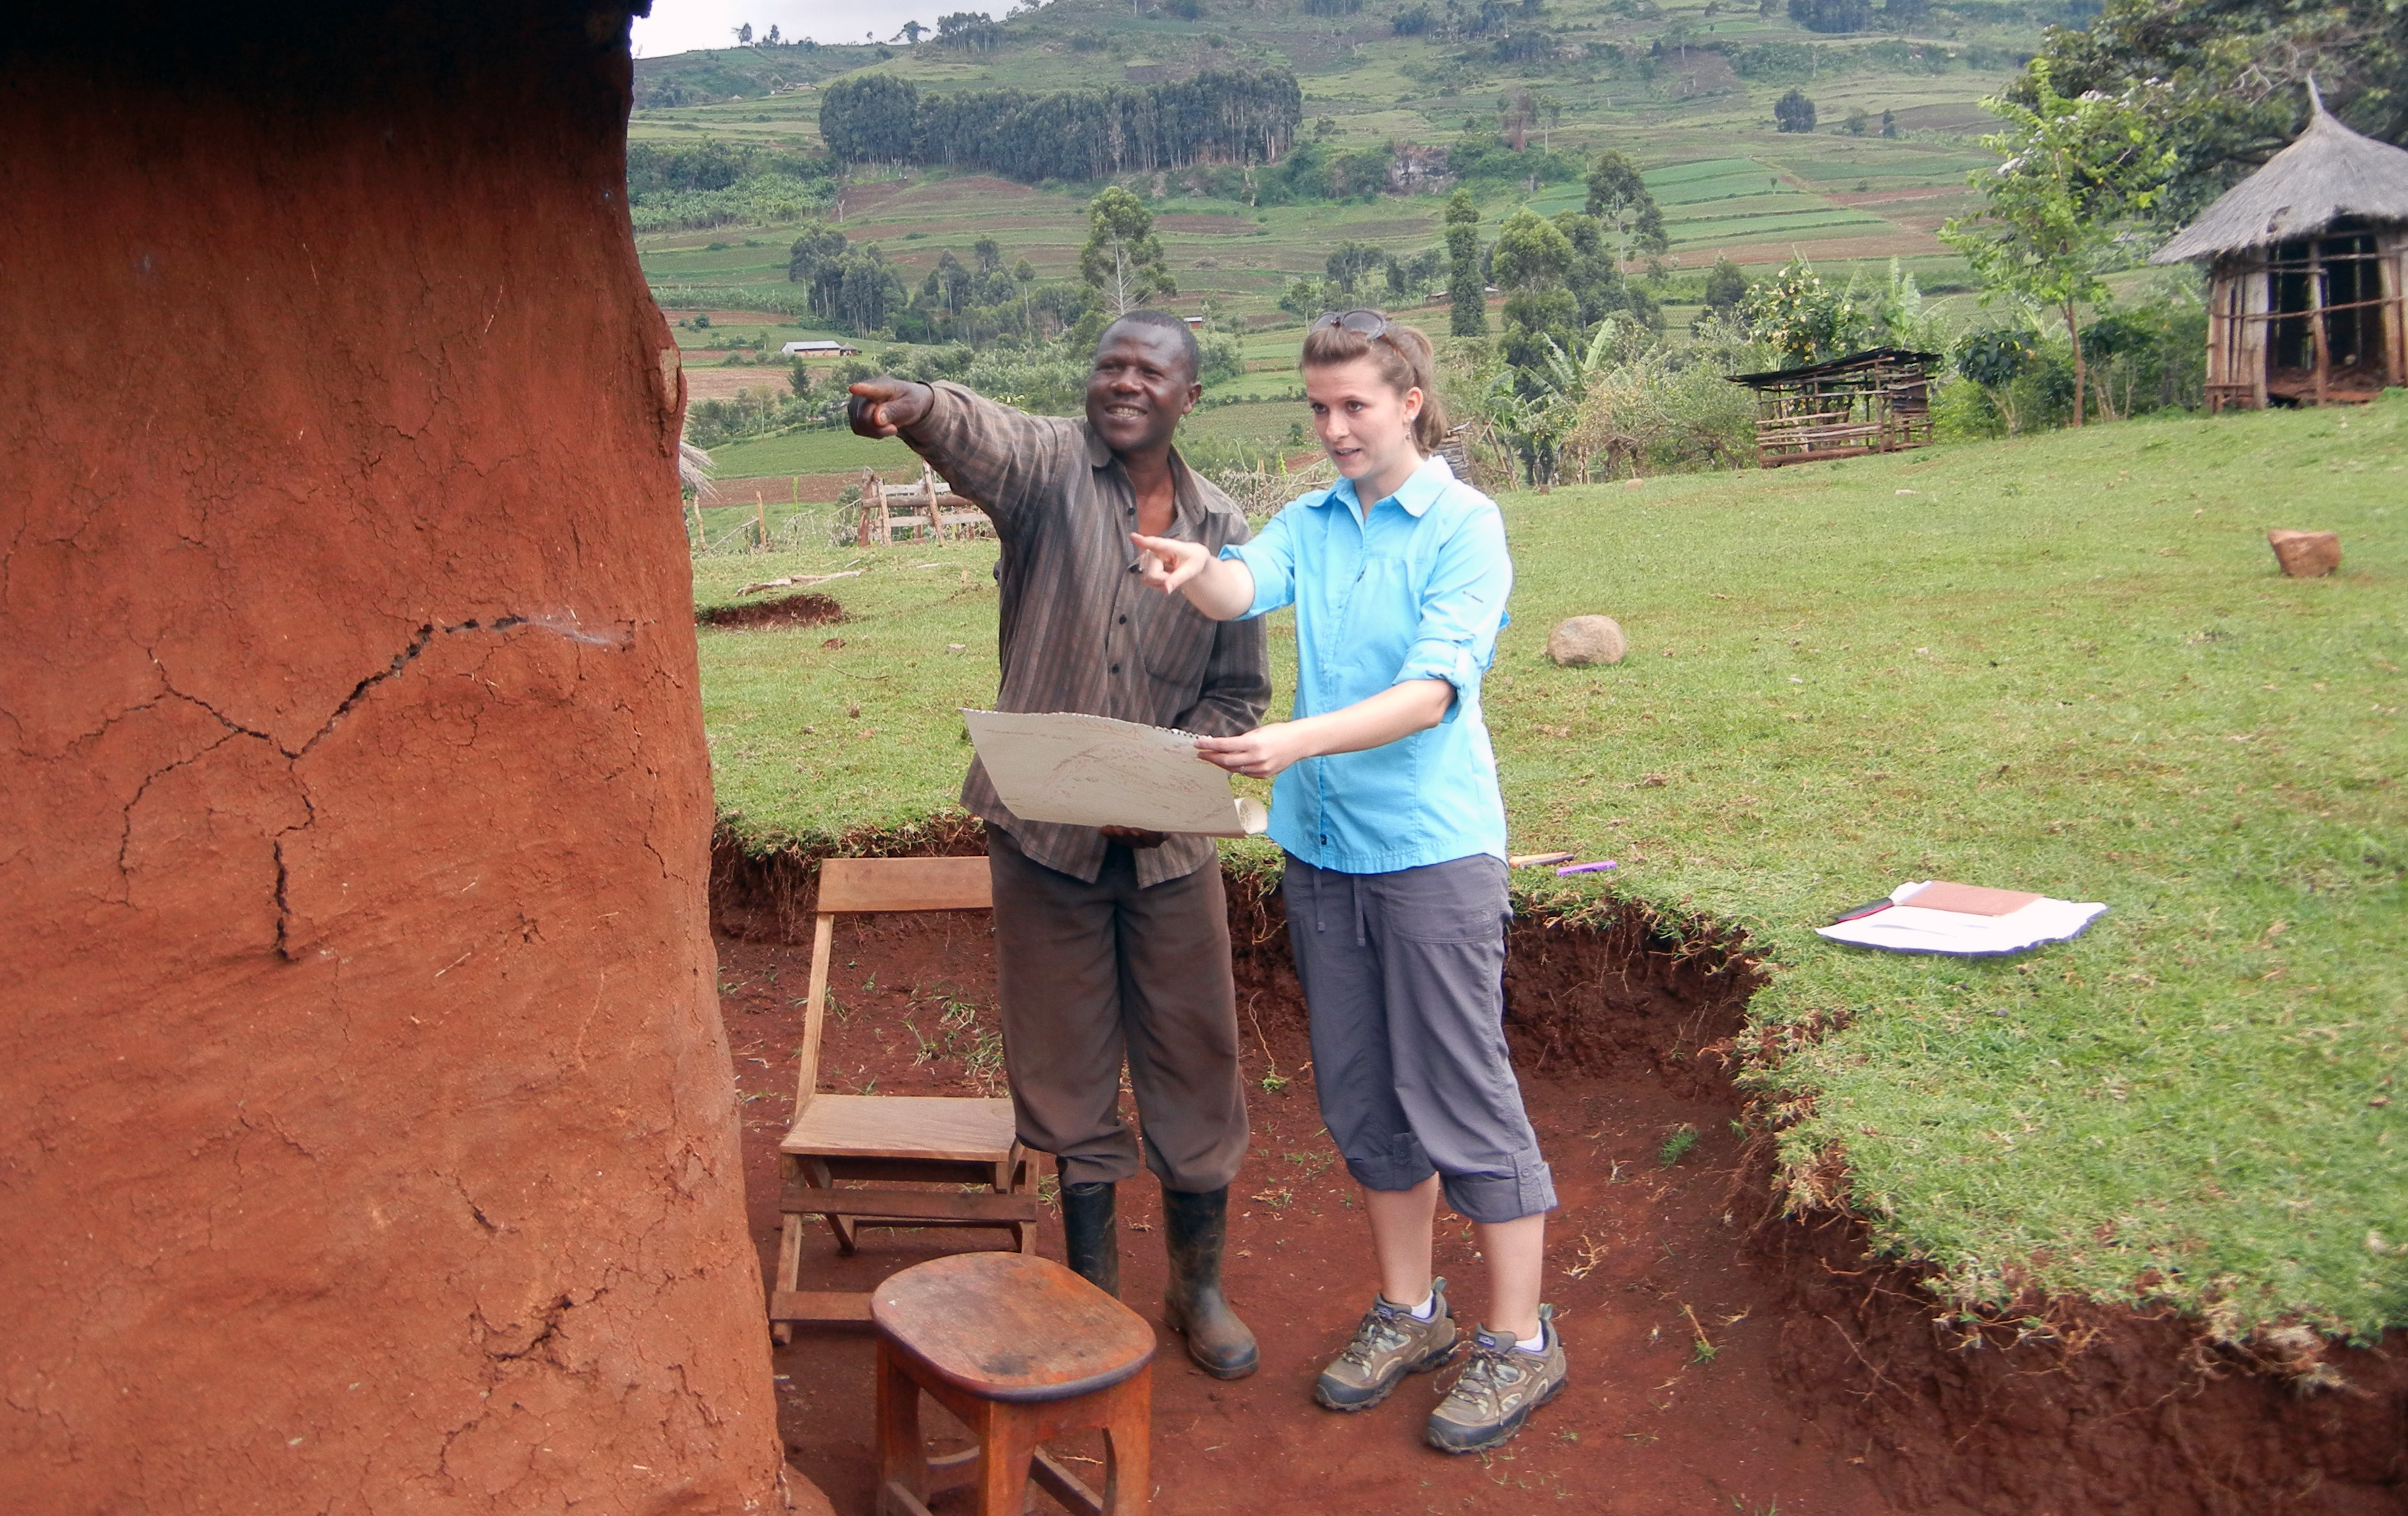 A Virginia Tech employee stands next to a farmer with a map in Uganda.